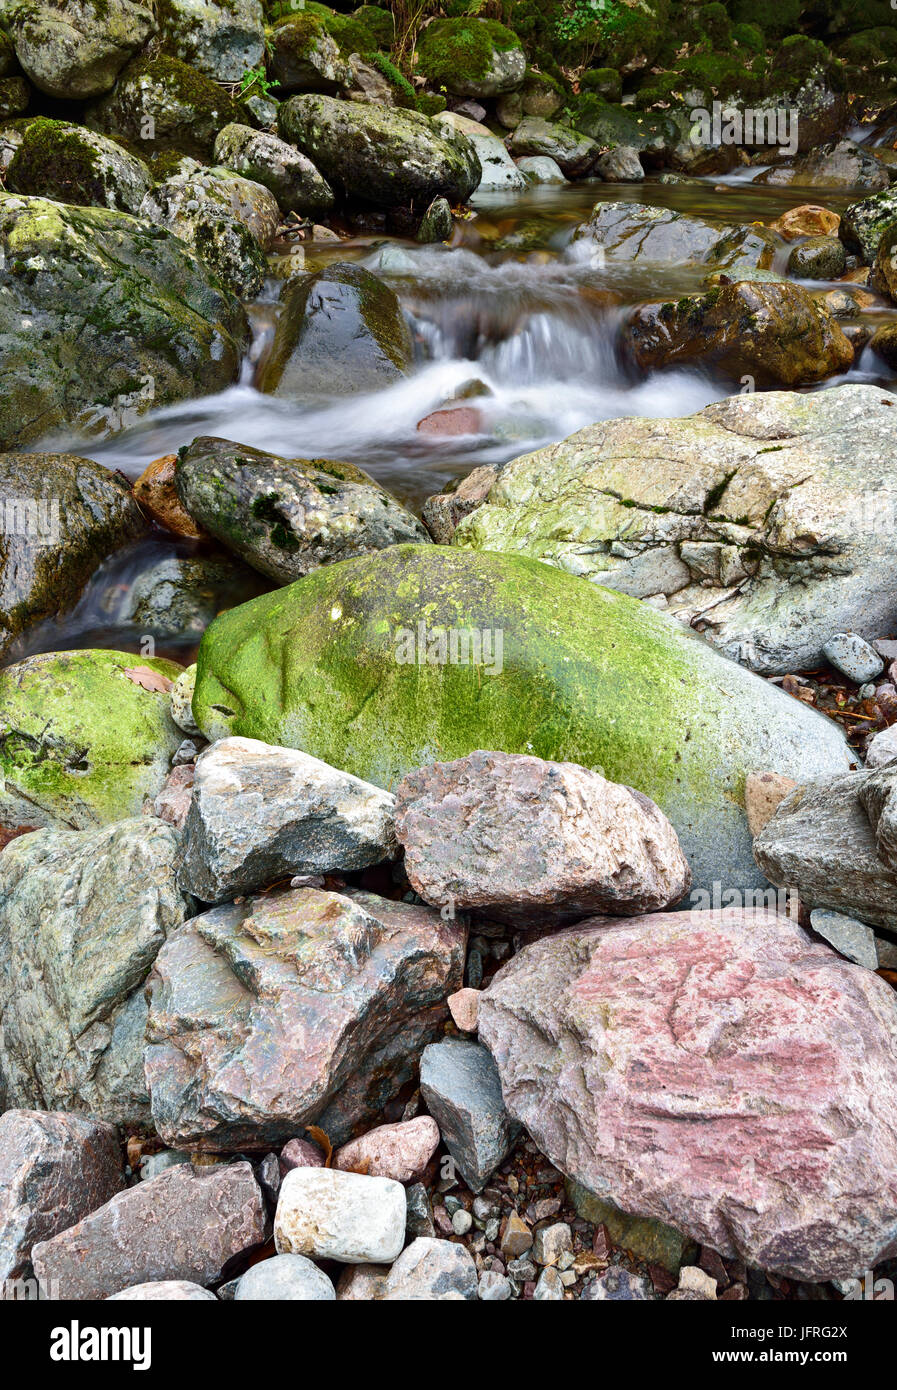 A view of a colorful part of Dungeon Ghyll in the Cumbria landscape Stock Photo